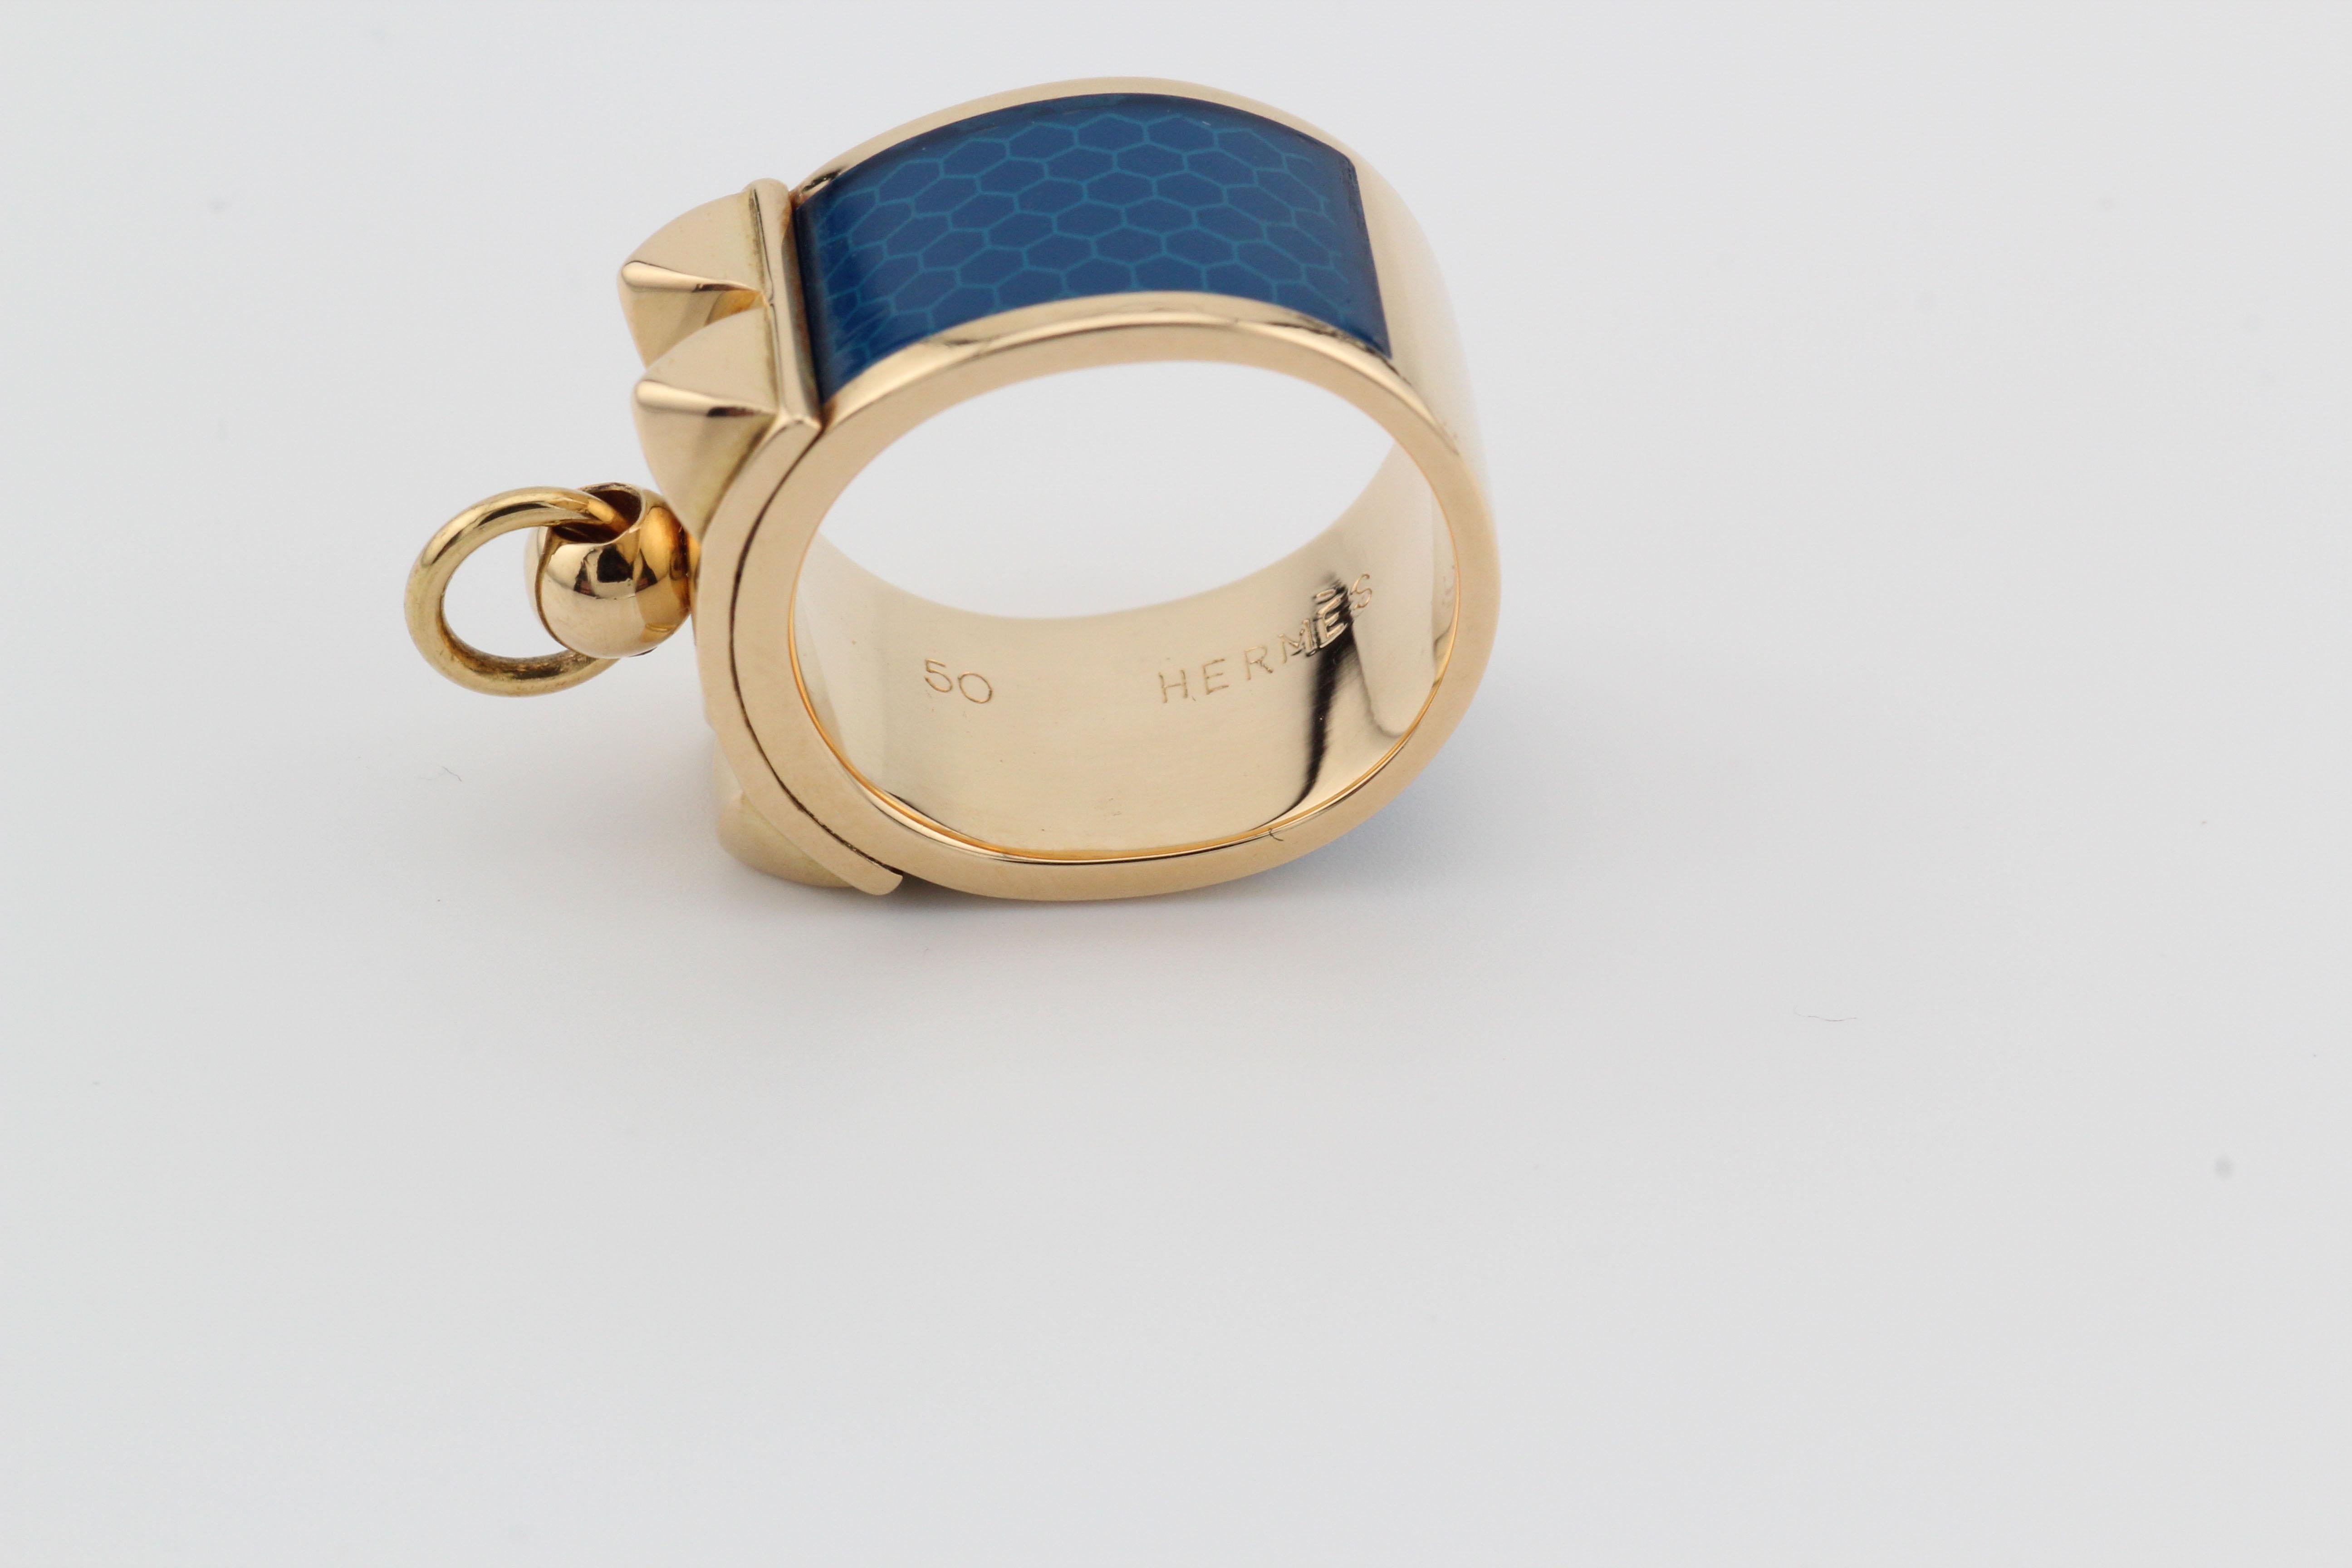 Hermes 18k Yellow Gold Collier De Chien Blue Enamel Ring Size 5 In Good Condition For Sale In Bellmore, NY